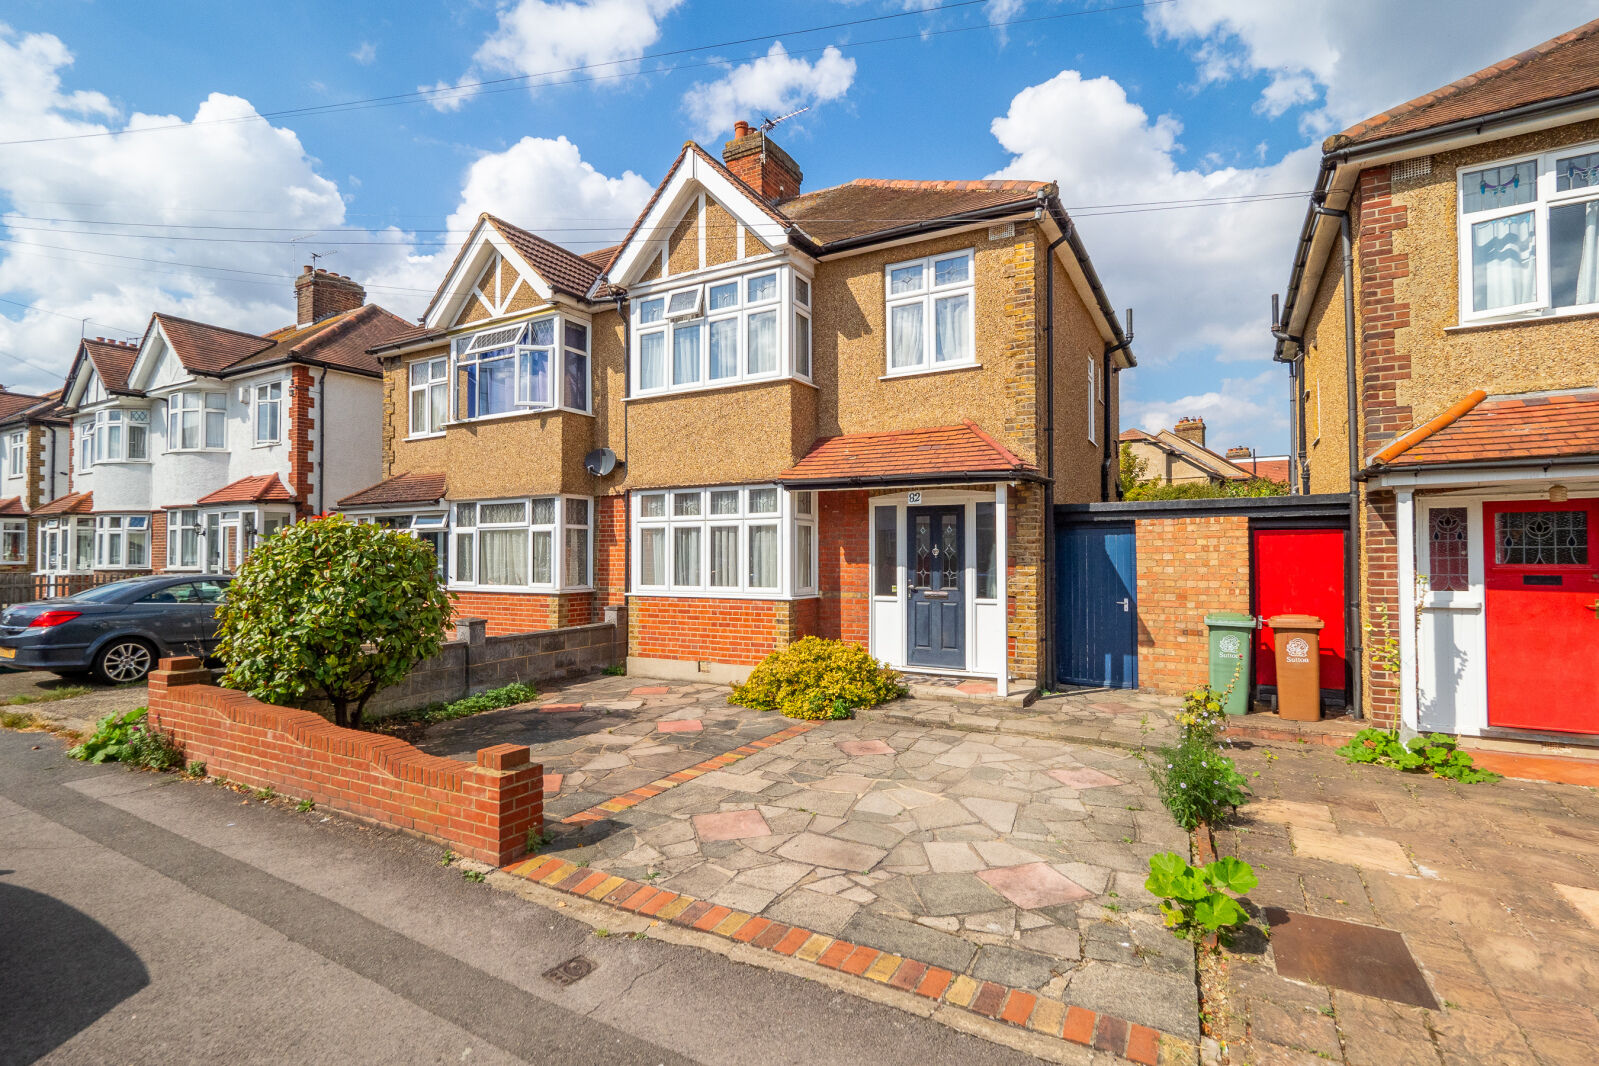 3 bedroom semi detached house for sale Abbotts Road, Cheam, SM3, main image